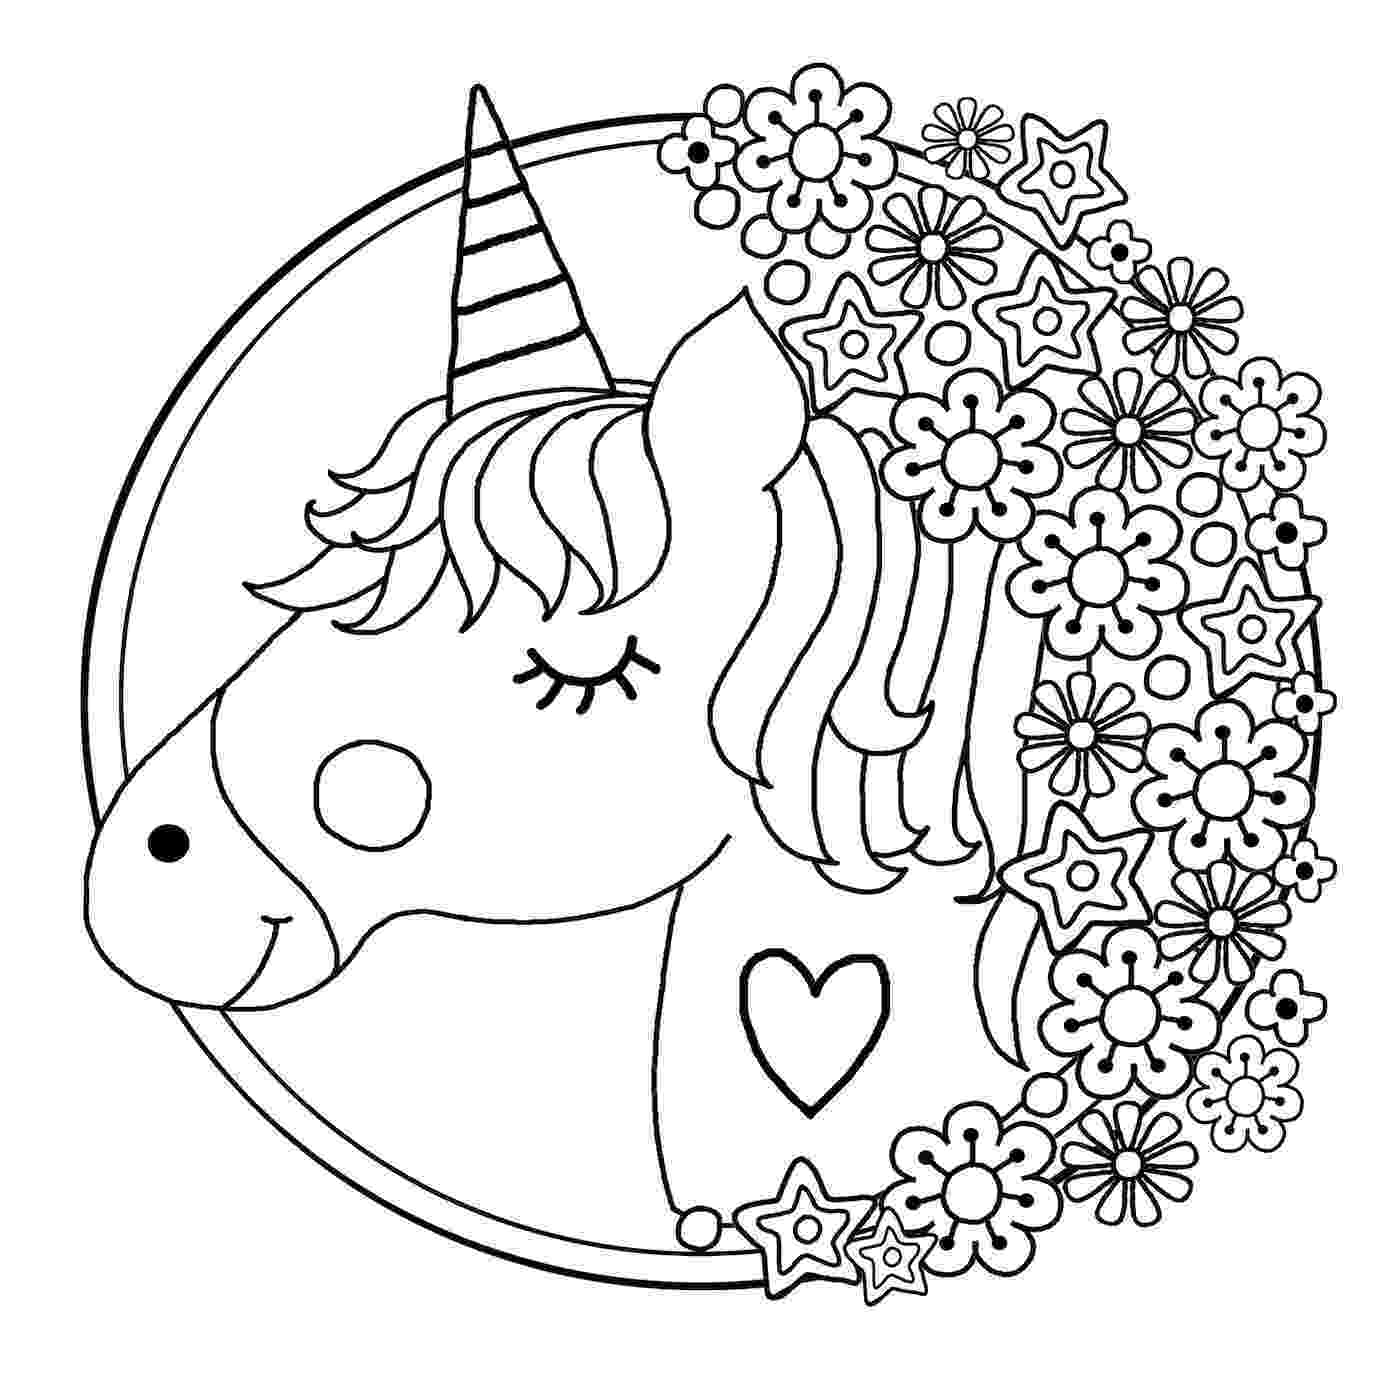 free unicorn pictures to color downloadable unicorn colouring page michael o39mara books pictures unicorn free color to 